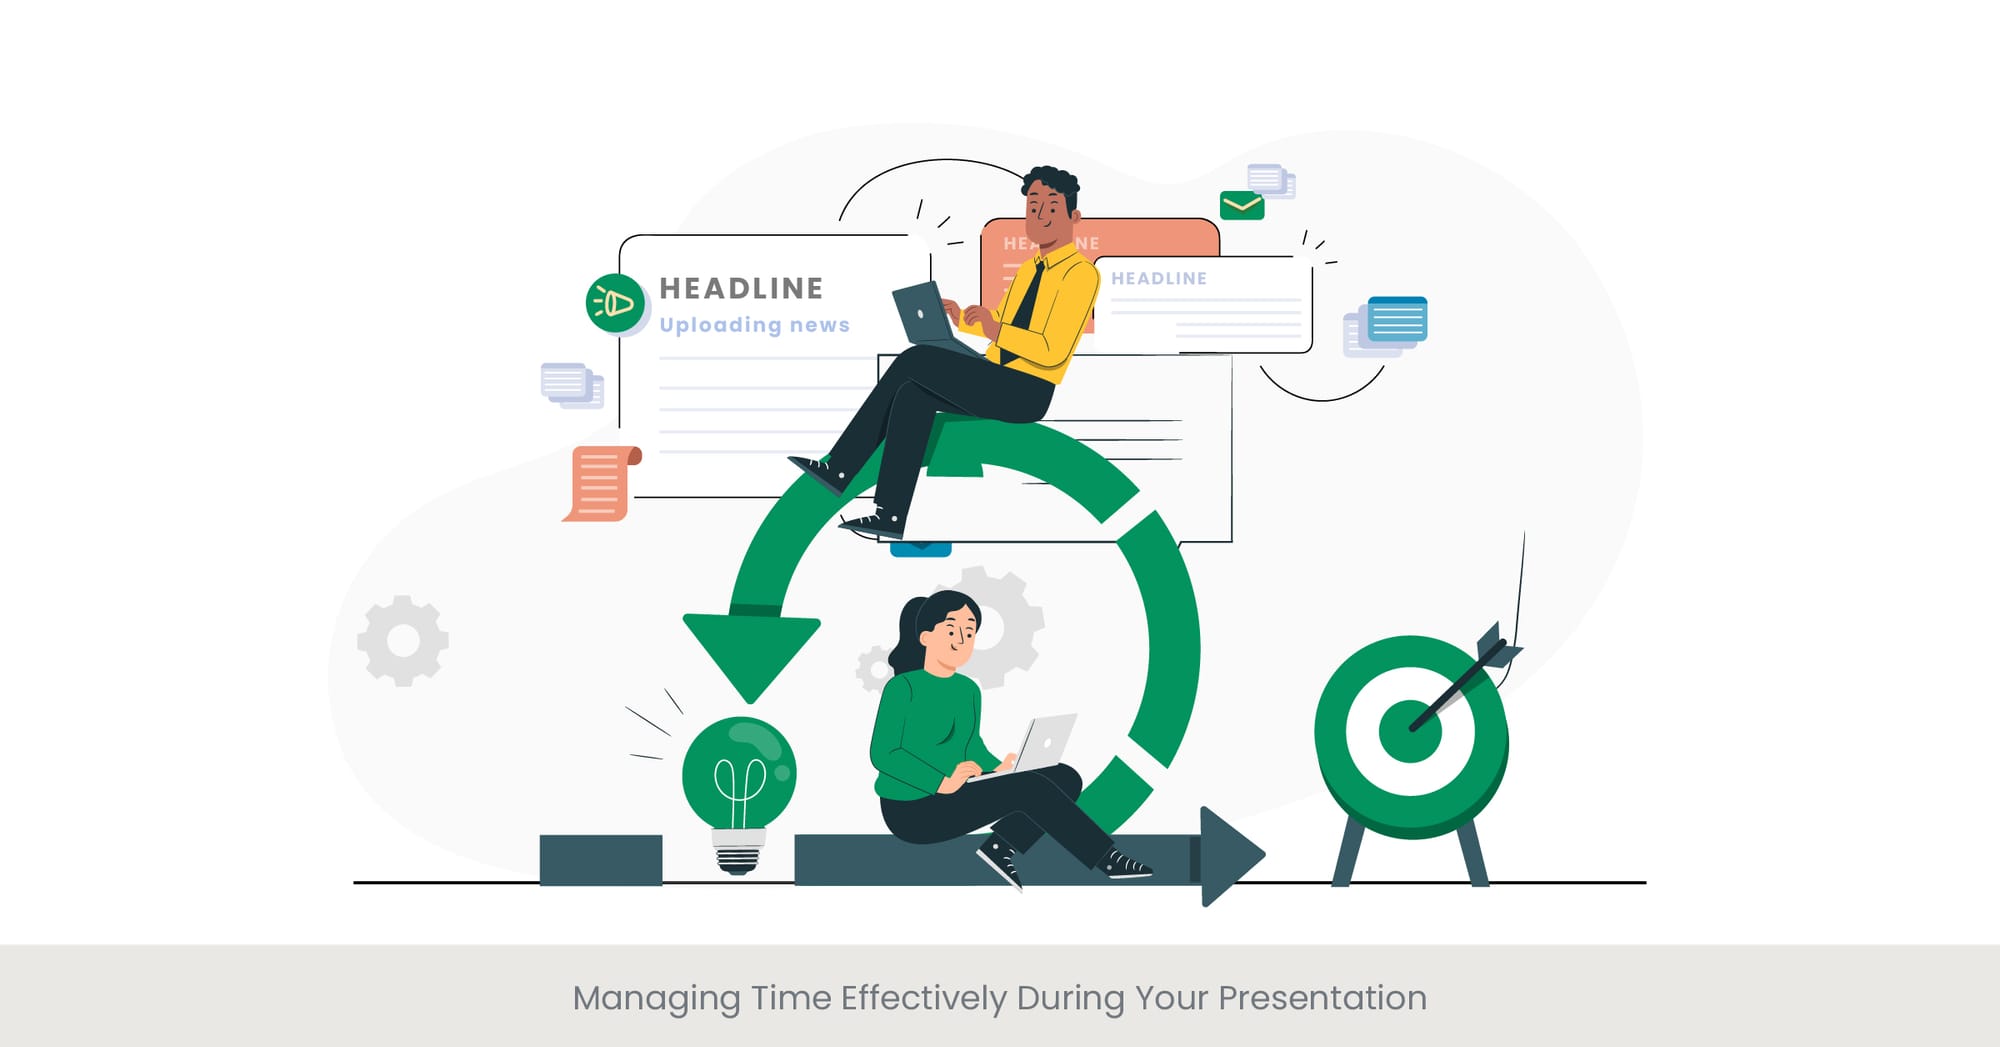 Managing Time Effectively During Your Presentation